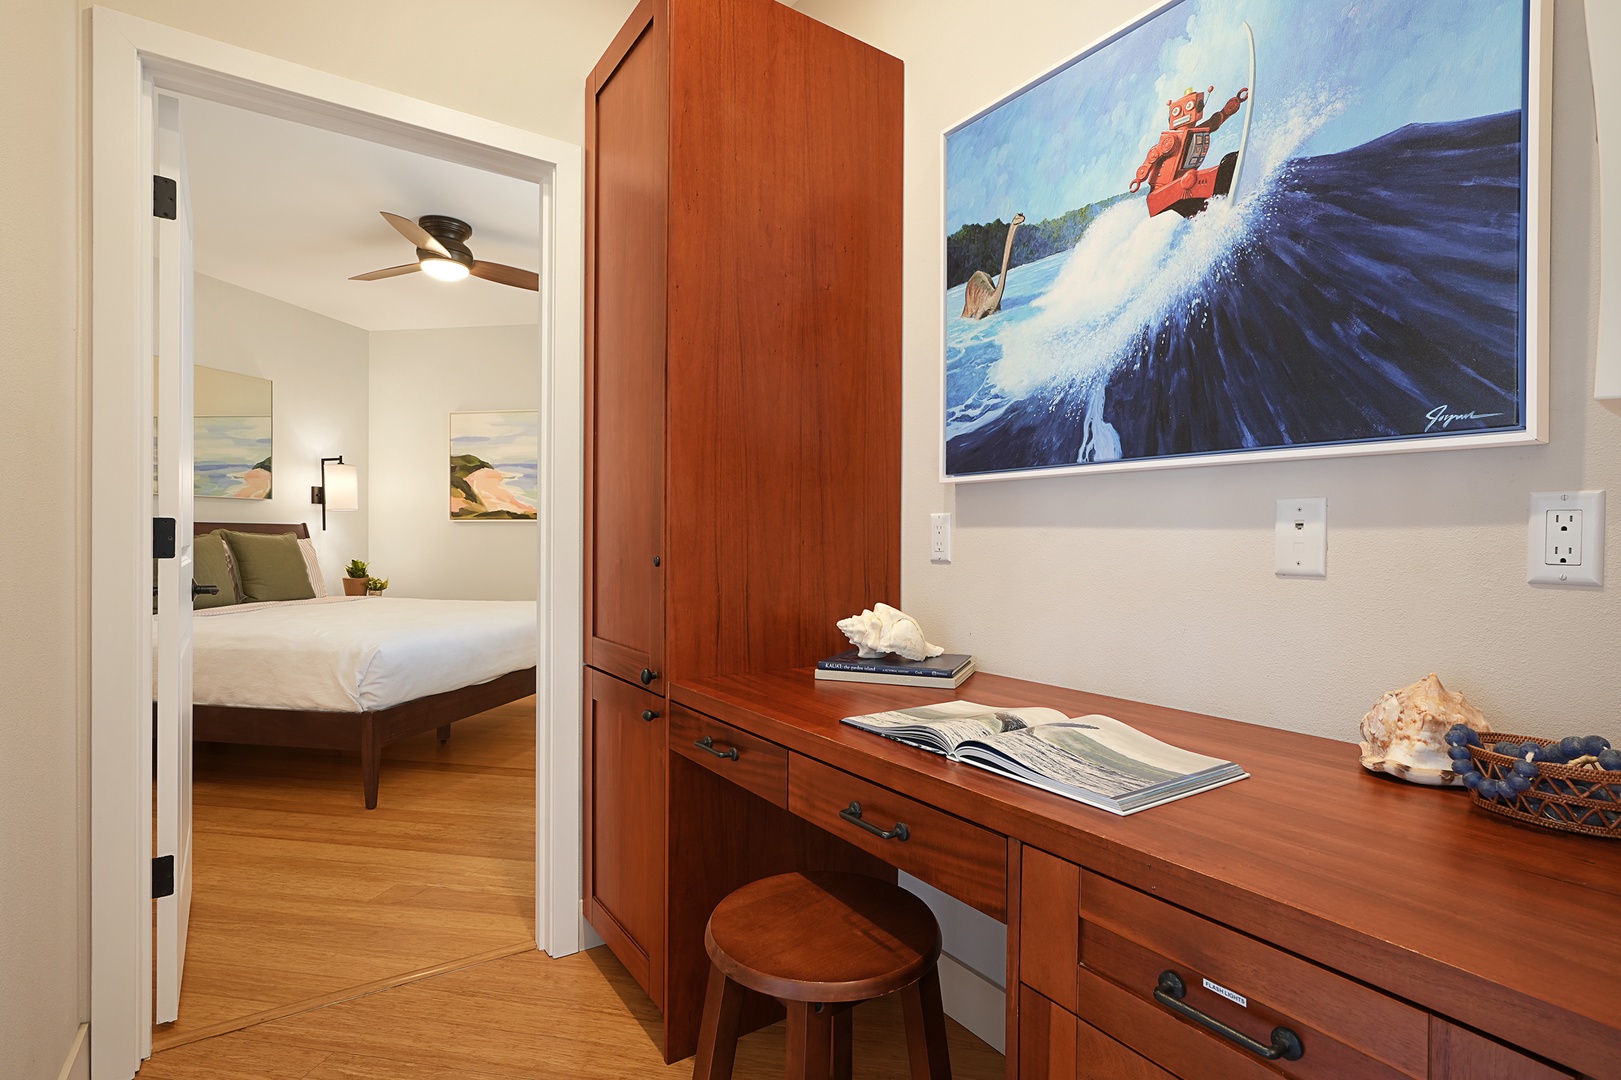 Koloa Vacation Rentals, Pili Mai 11K - There is also a workspace just off of Guest Bedroom 2